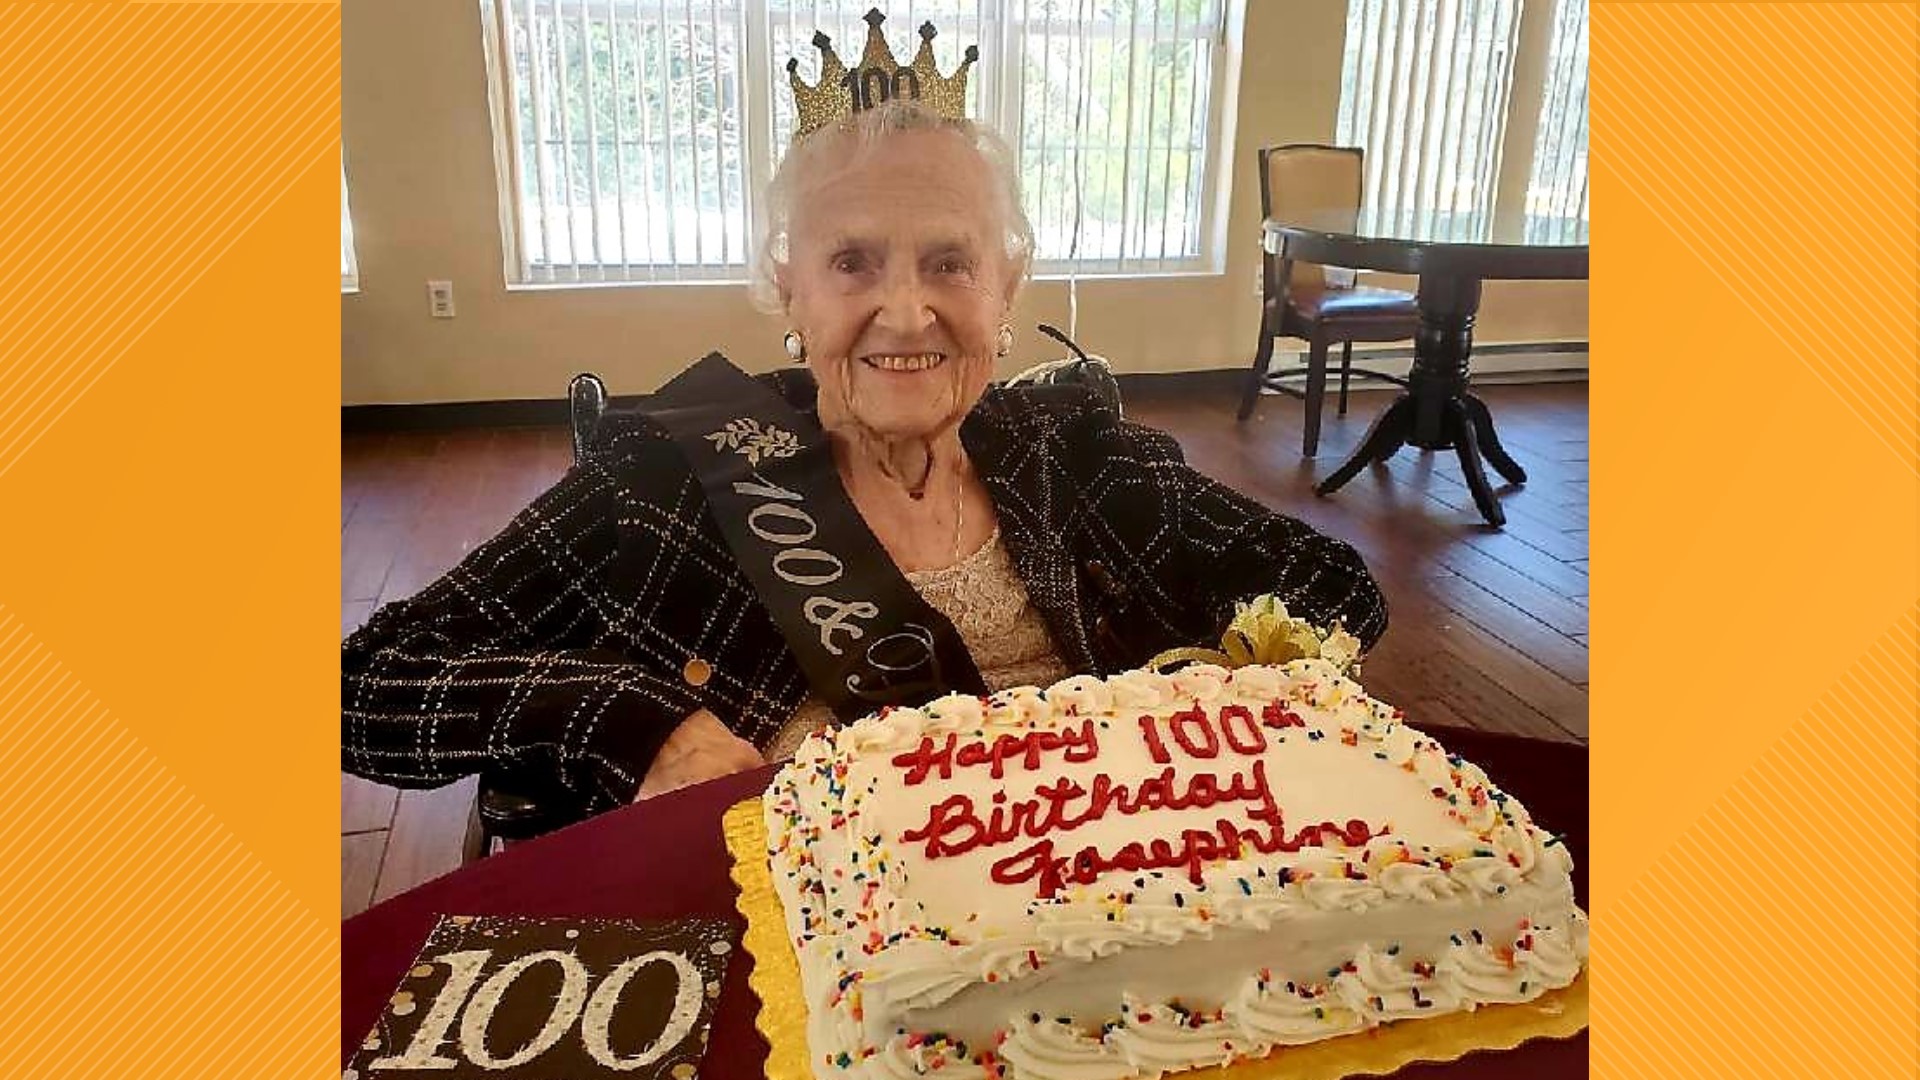 Newswatch 16 speaks with a special birthday girl from Plymouth on her 100th birthday